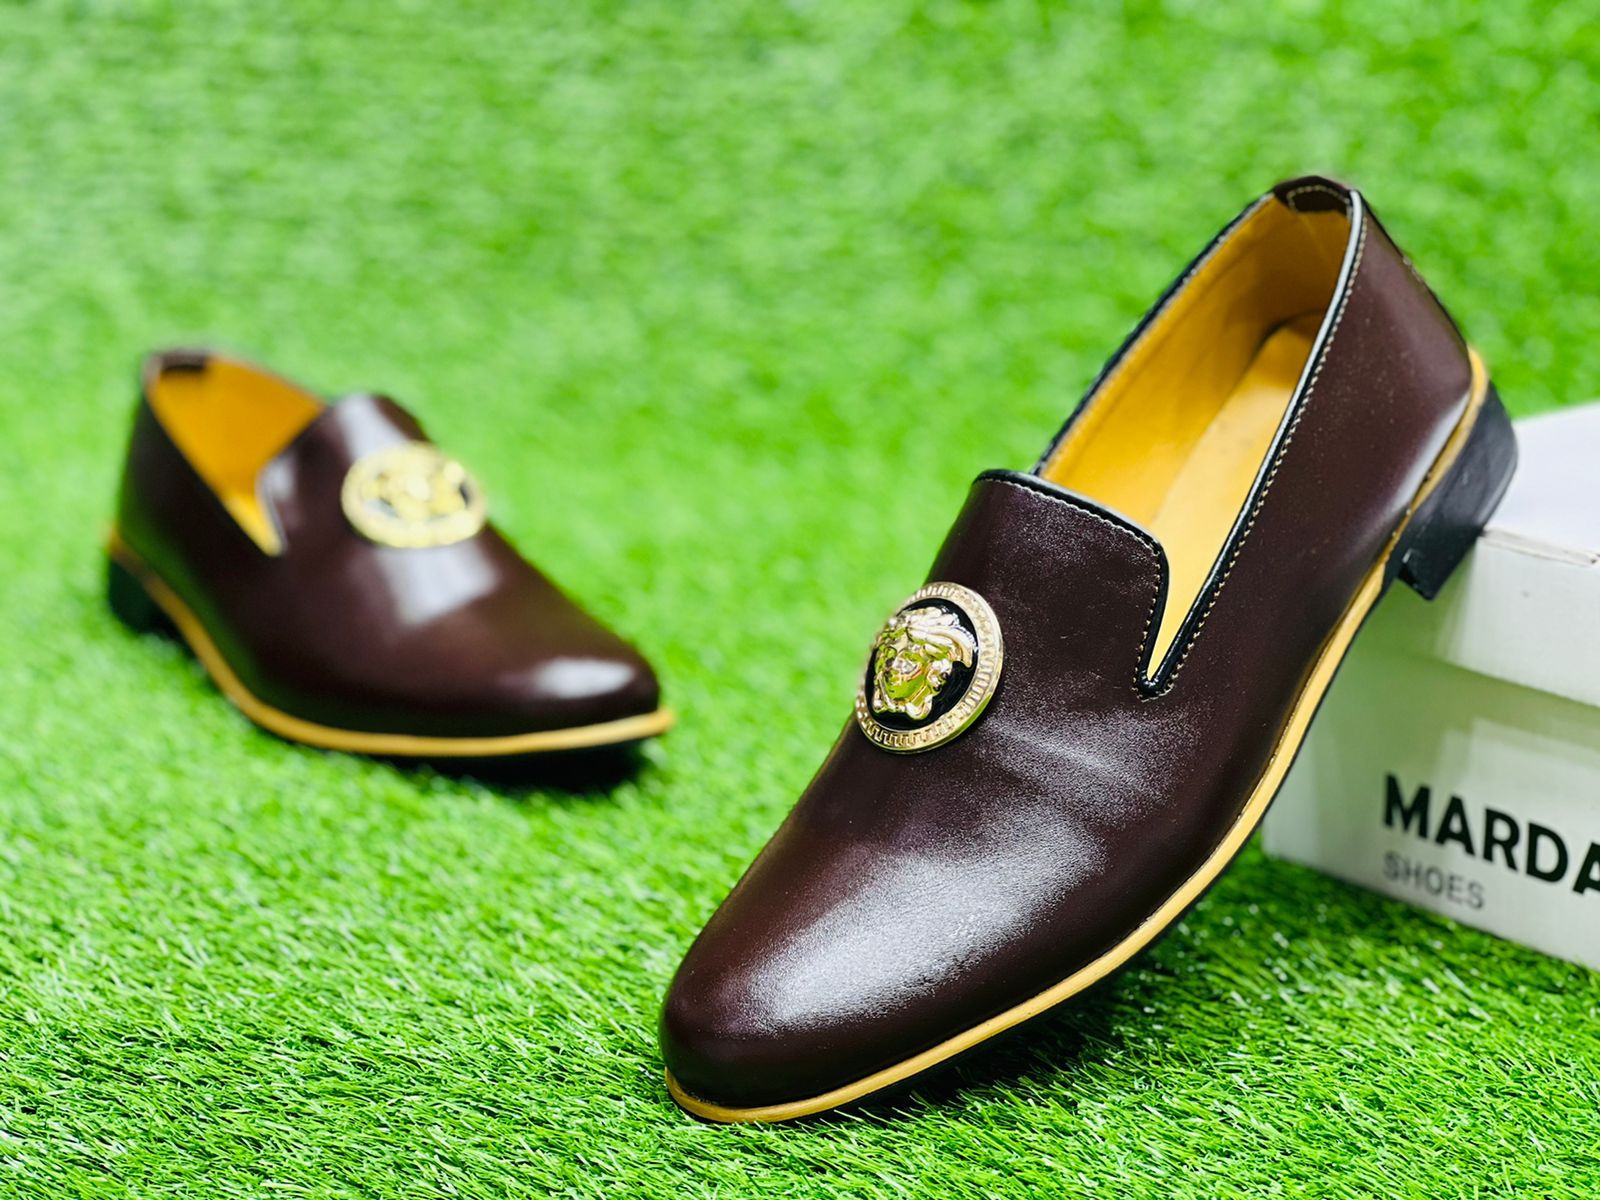 The Best Men's Formal Gucci Shoes Price In Pakistan